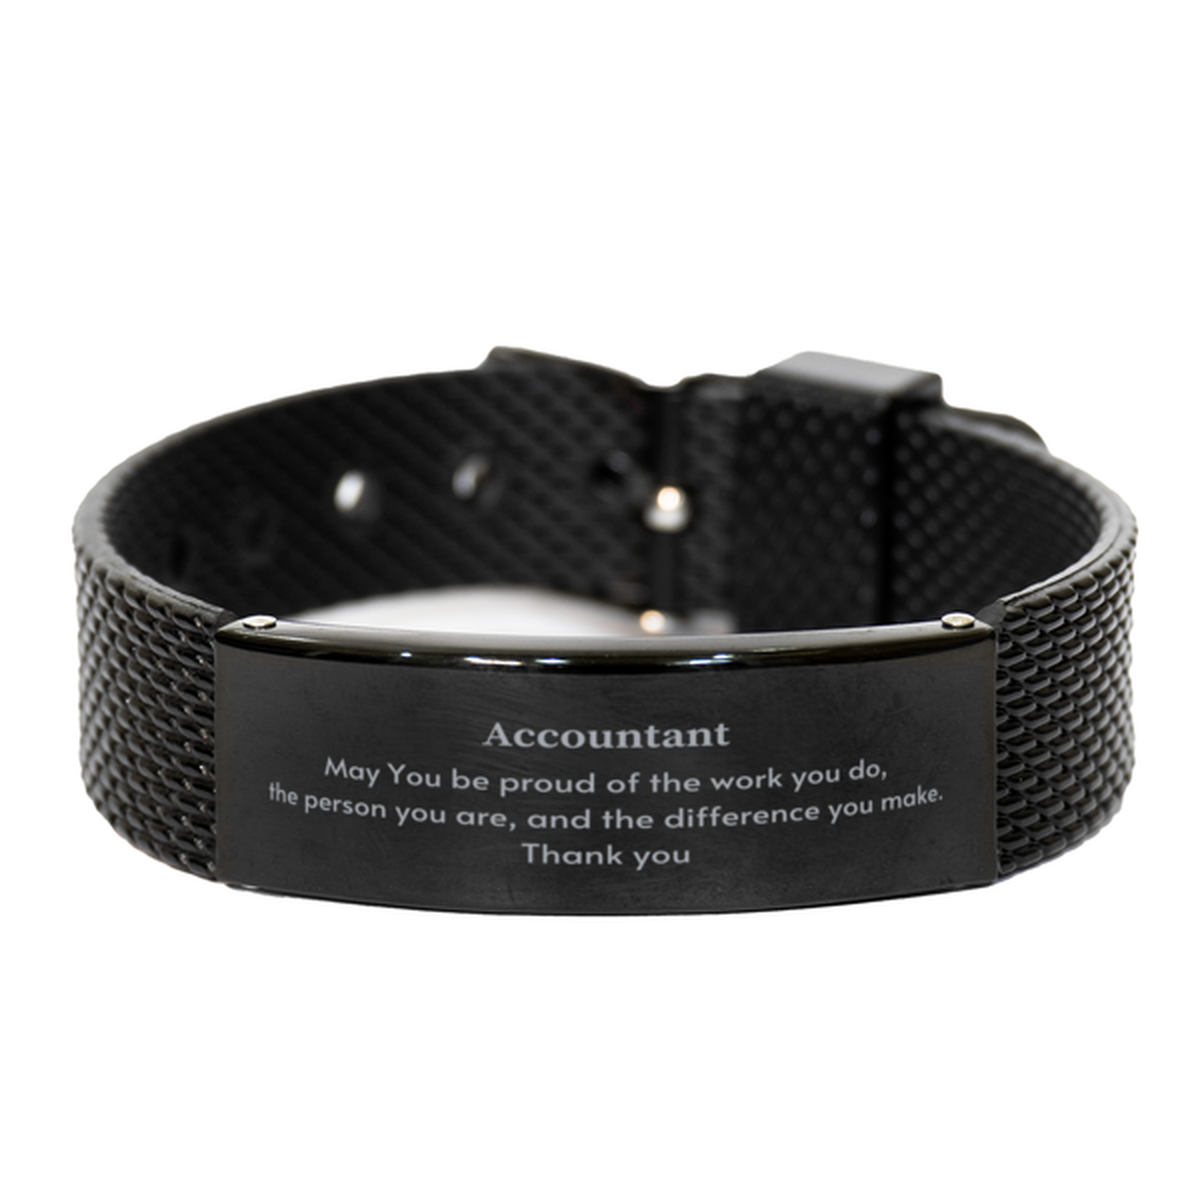 Heartwarming Black Shark Mesh Bracelet Retirement Coworkers Gifts for Accountant, Accountant May You be proud of the work you do, the person you are Gifts for Boss Men Women Friends